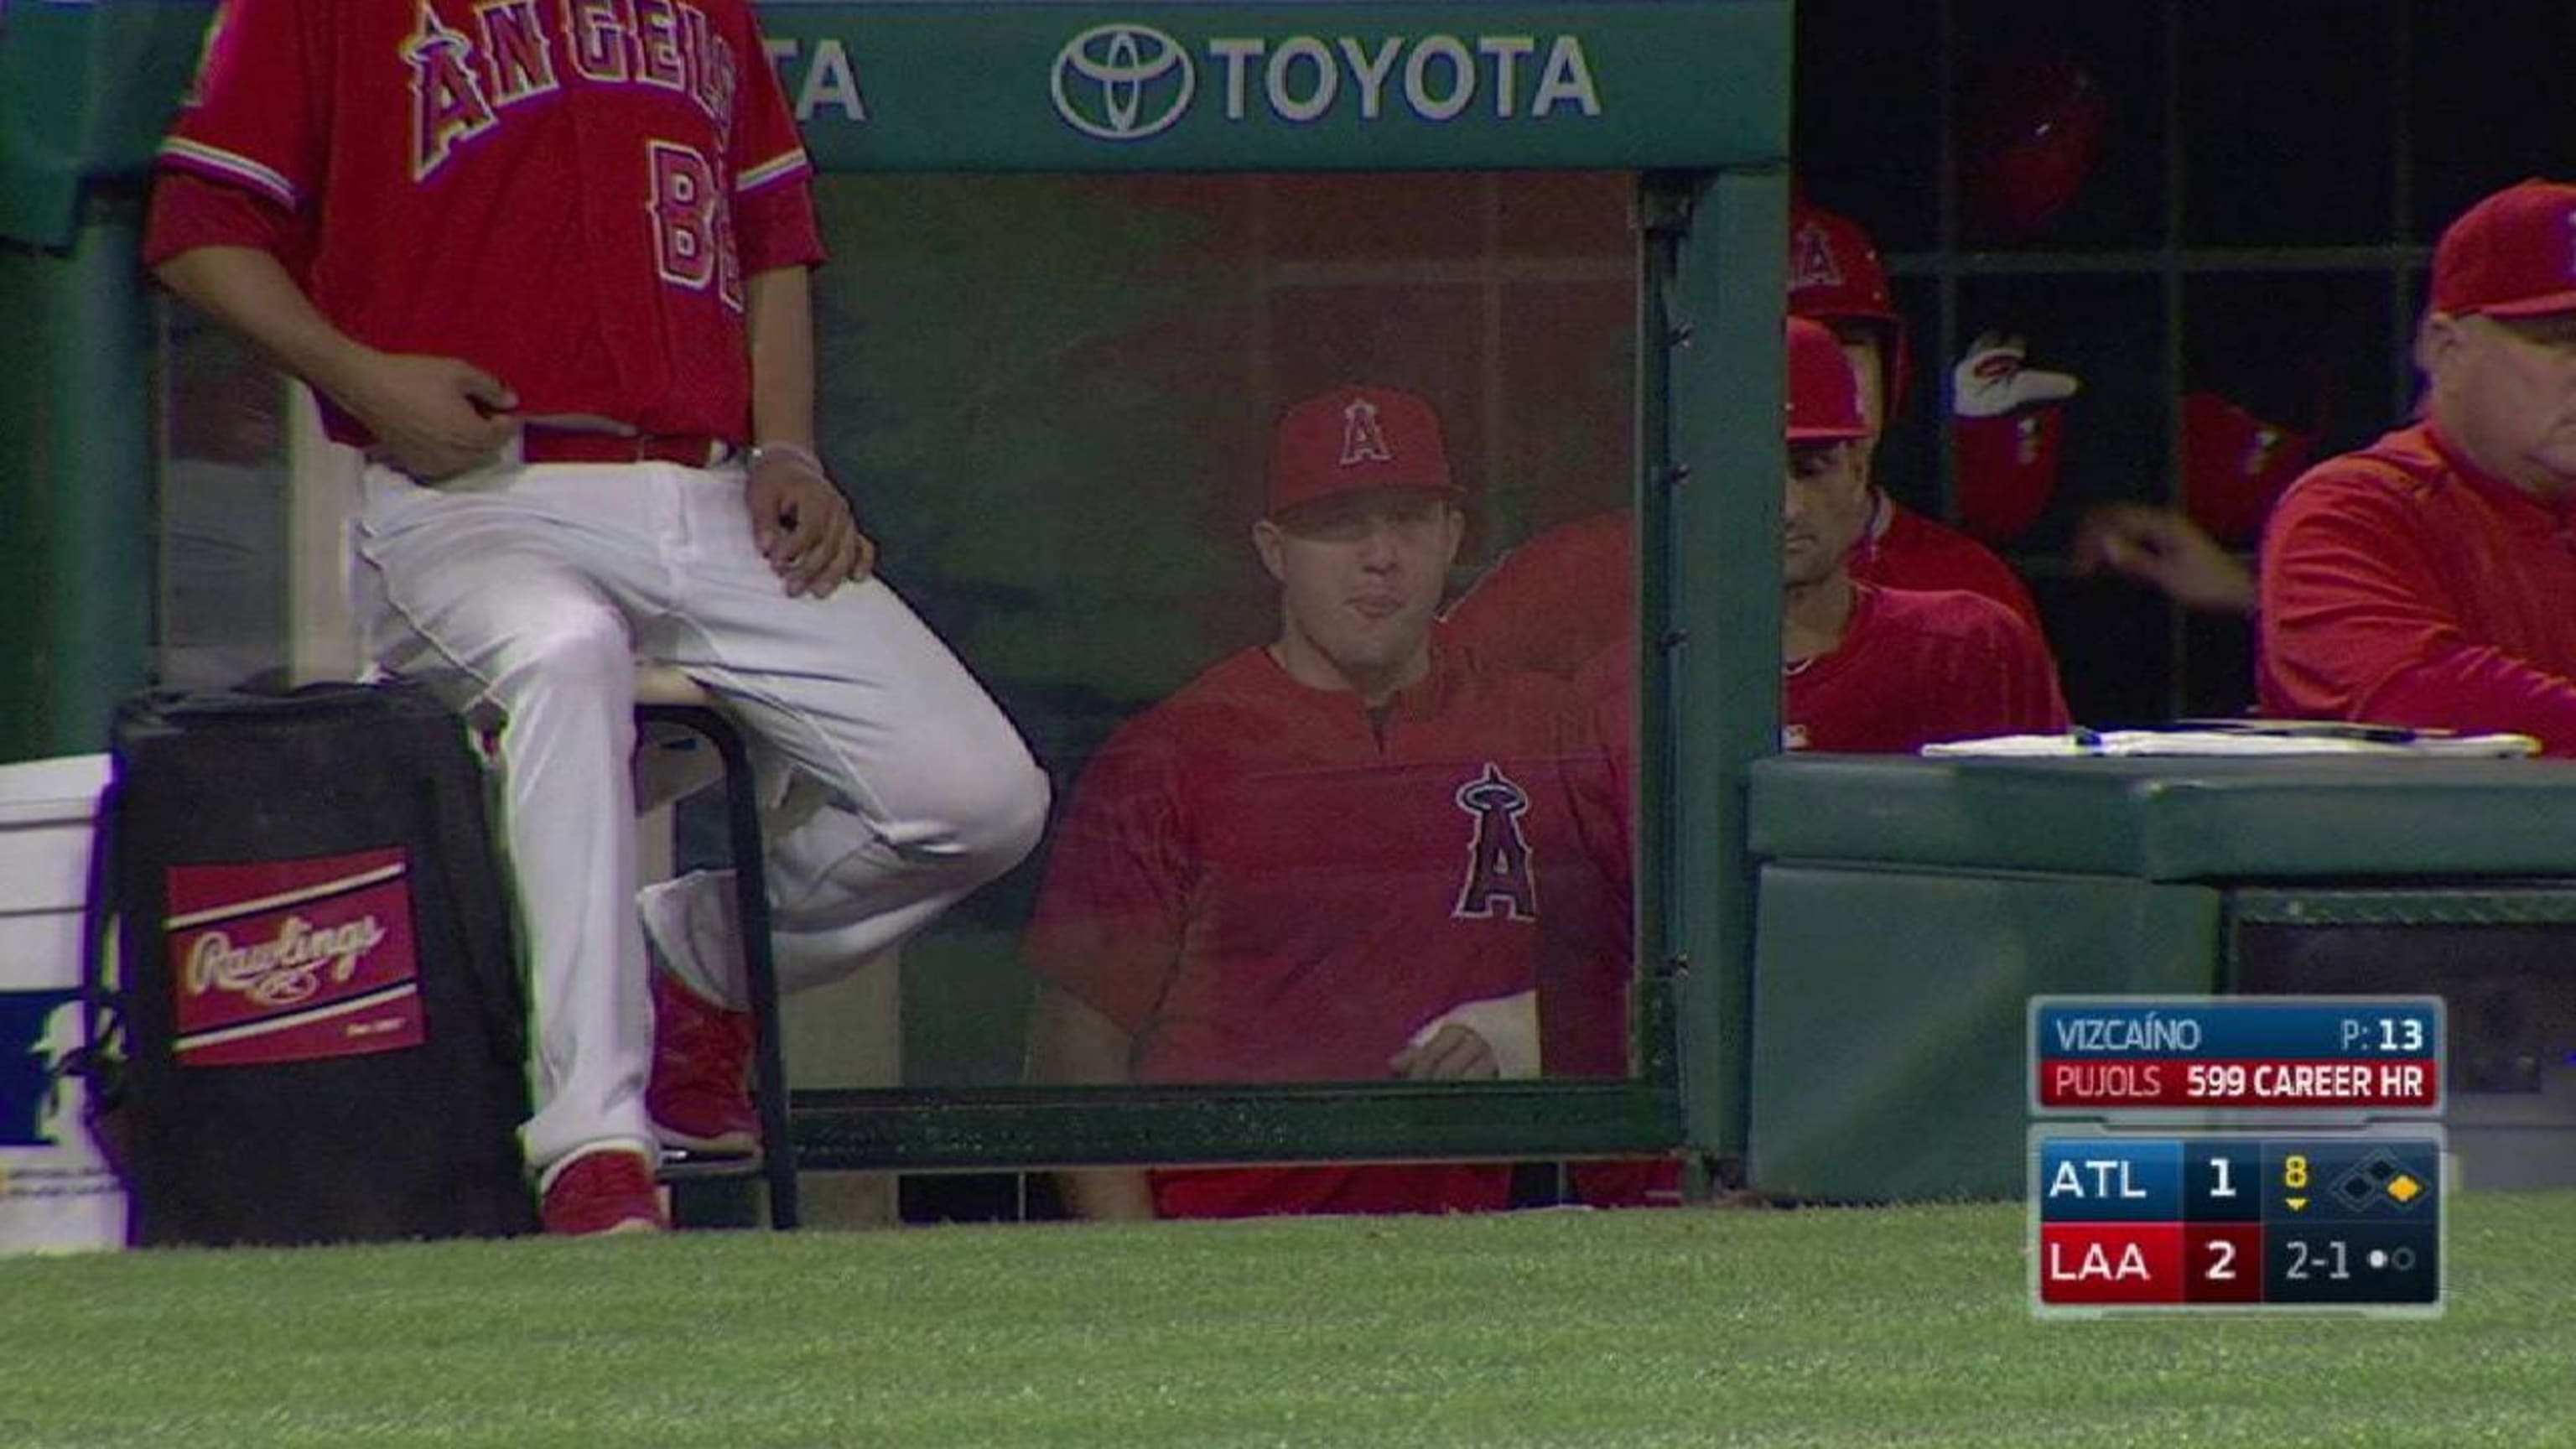 Mike Trout made sure to watch every Albert Pujols at-bat, just in case he hit his 600th home run MLB